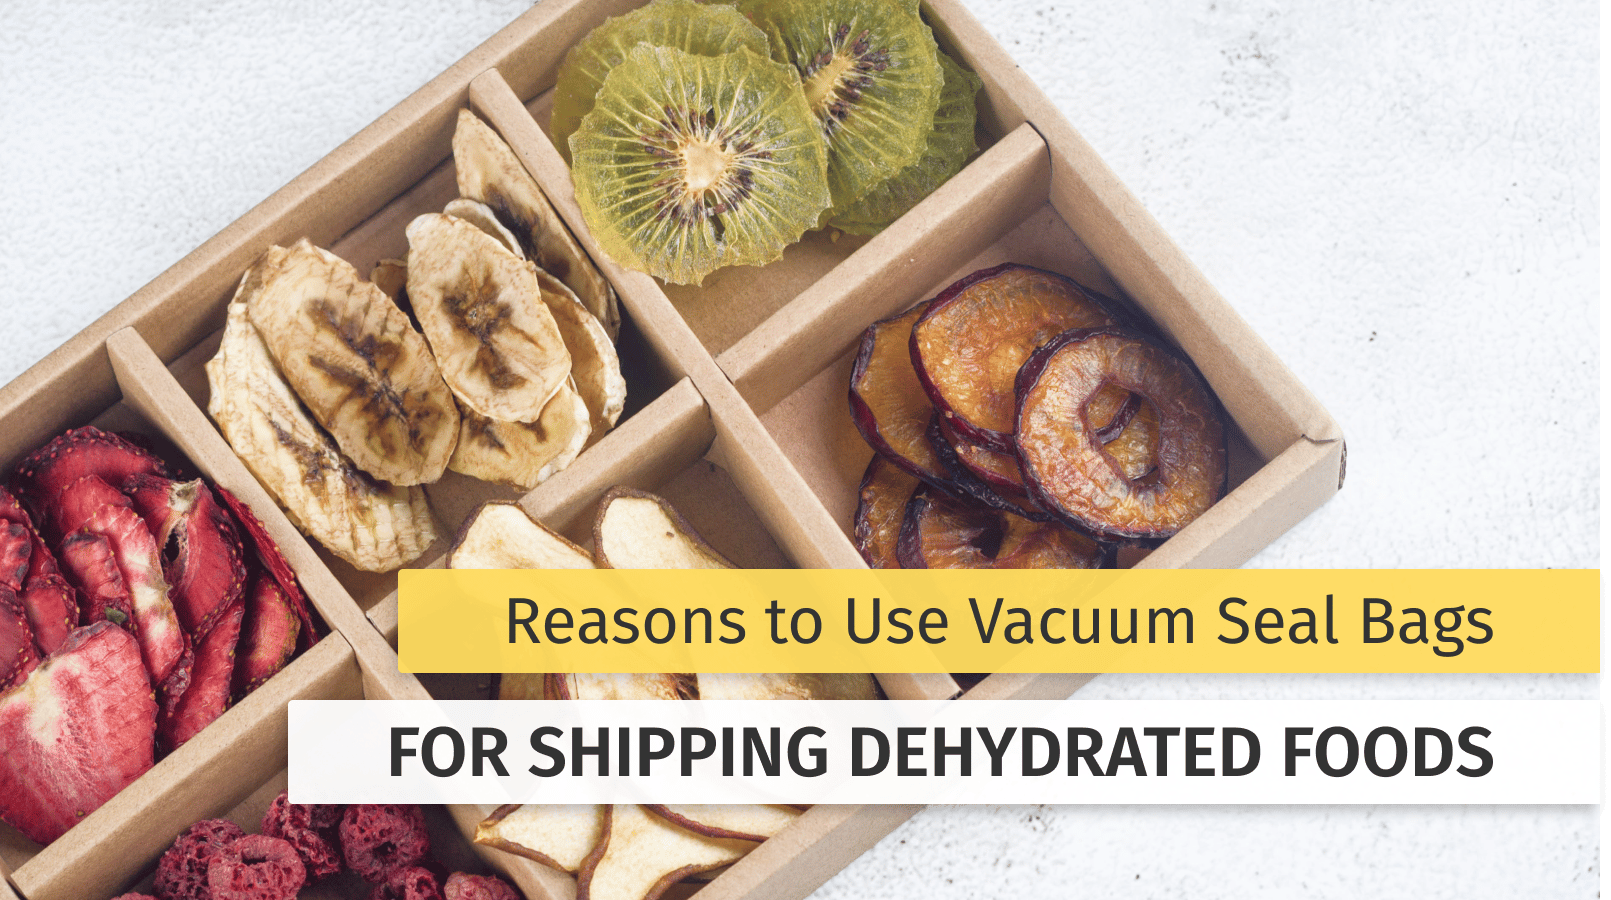 Reasons To Use Vacuum Seal Bags For Shipping Dehydrated Foods - OutOfAir